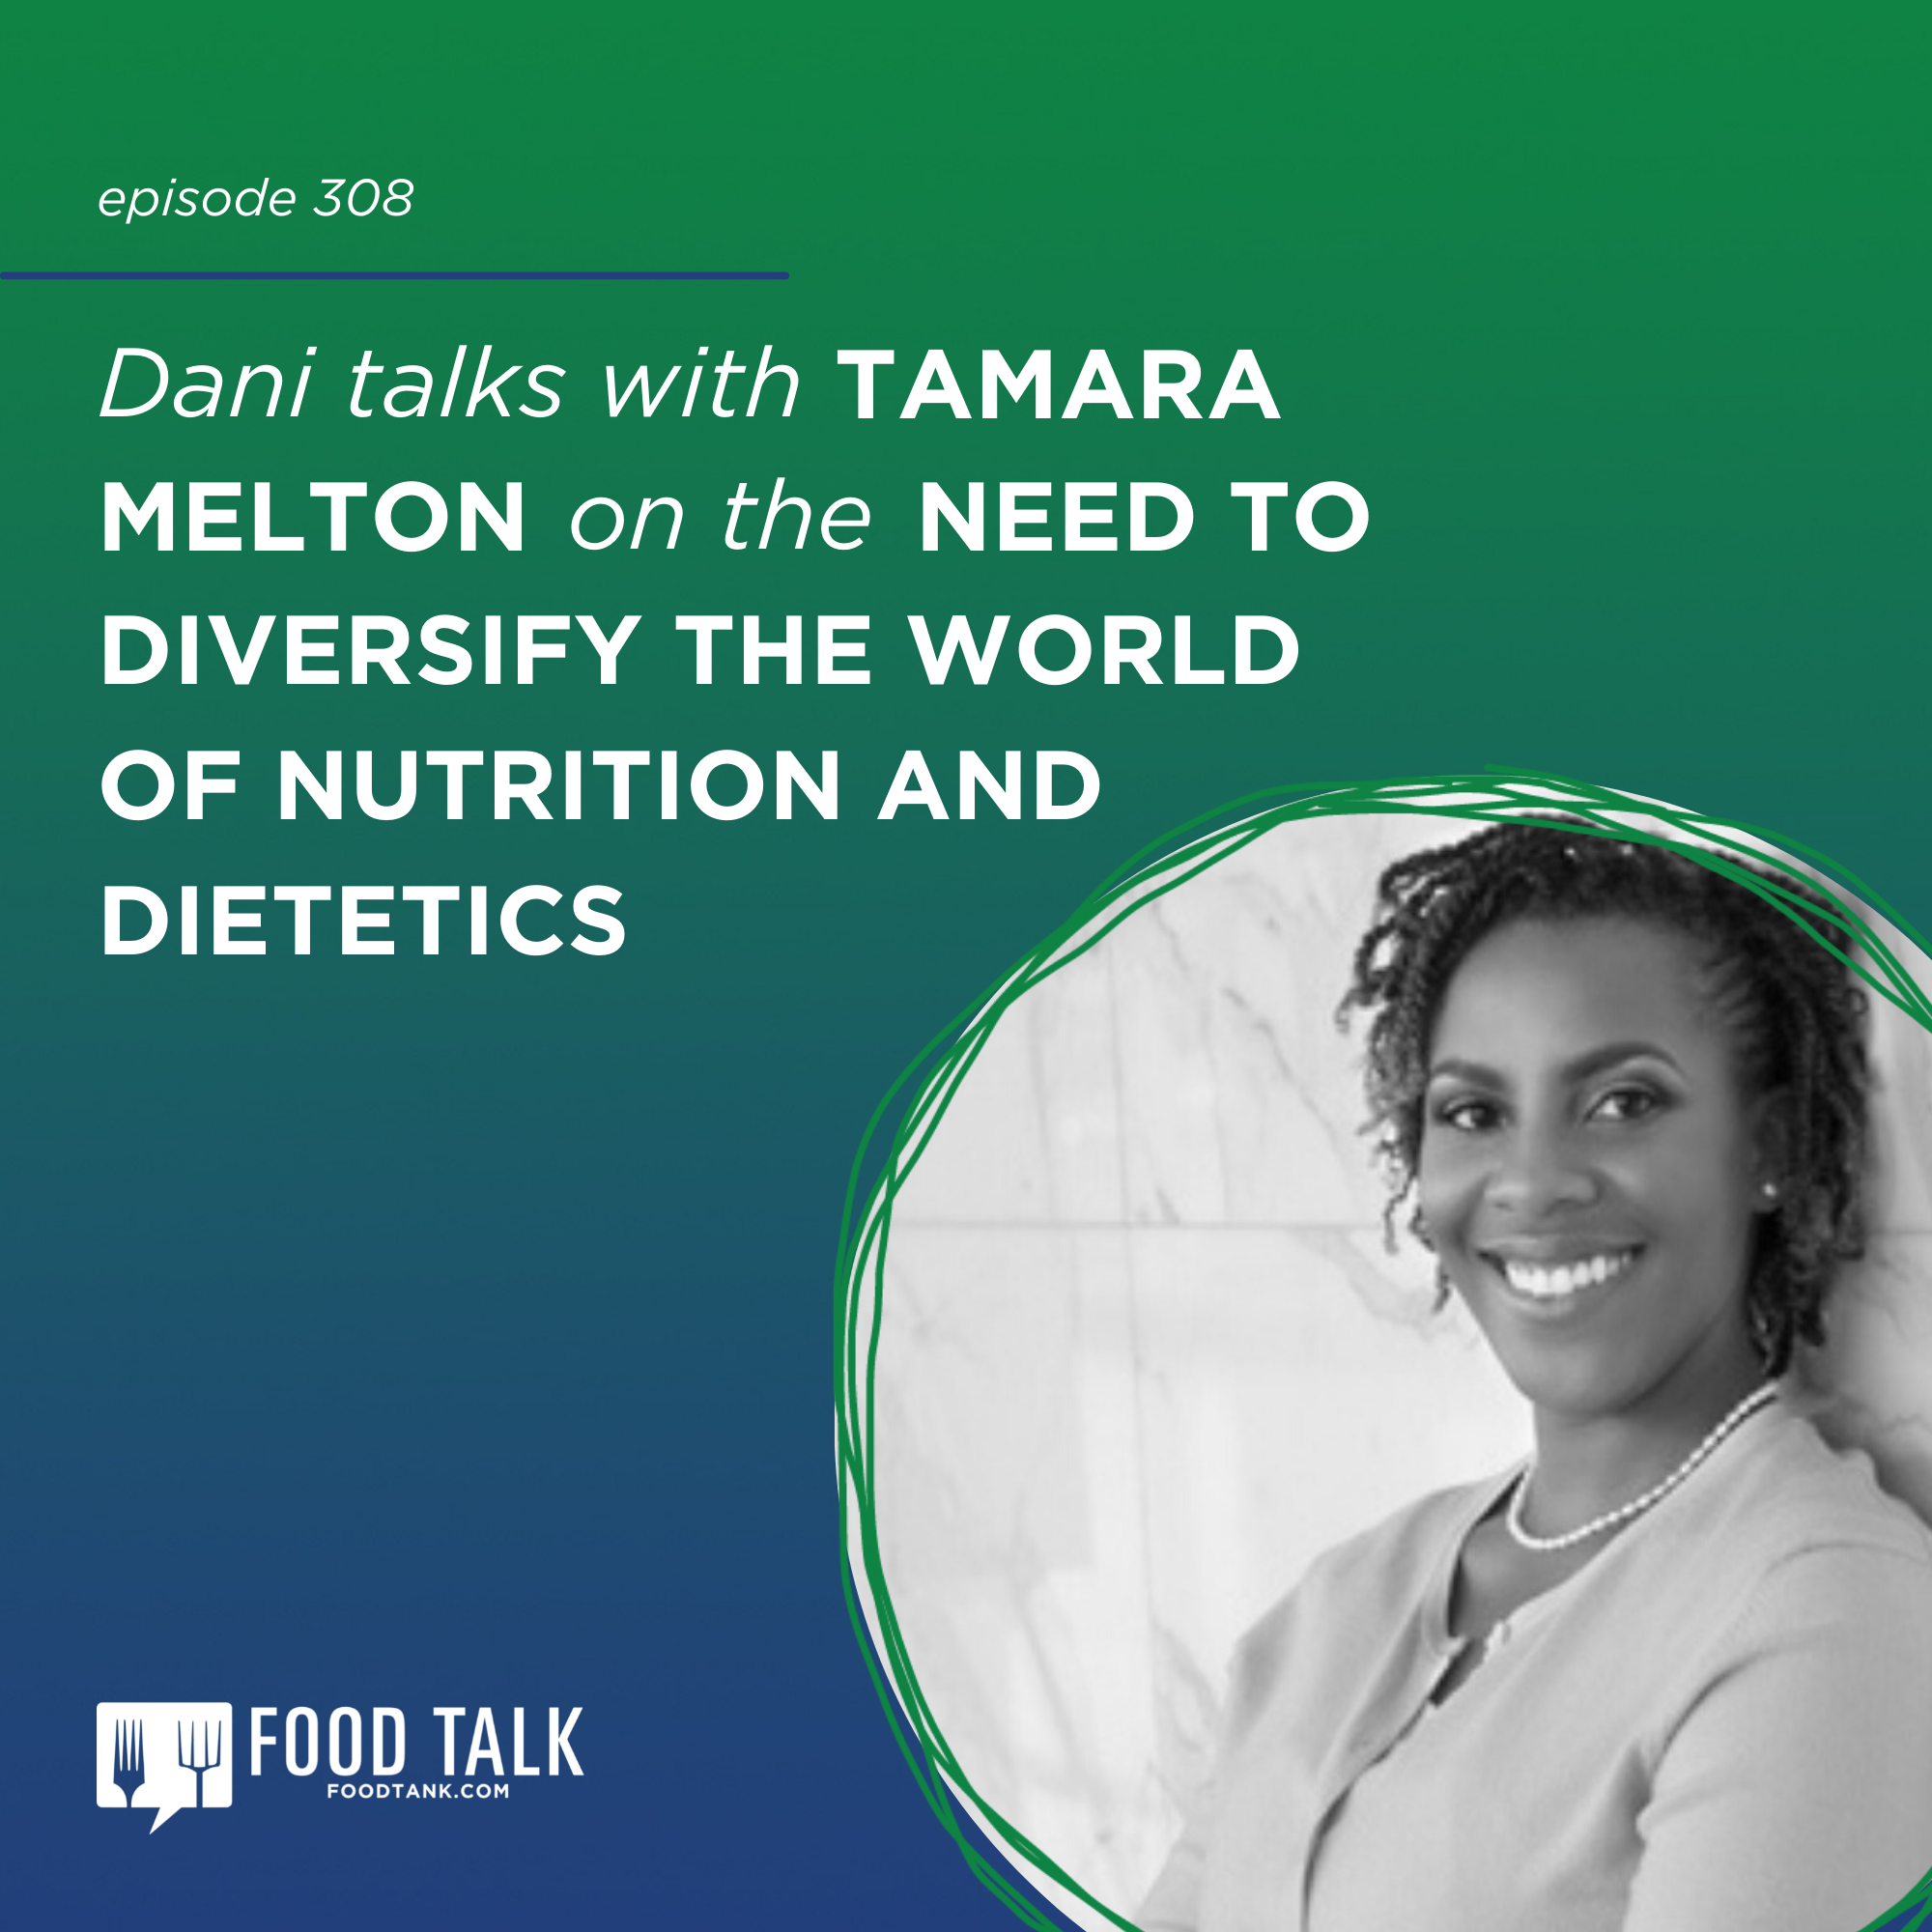 https://podcasts.apple.com/us/podcast/308-tamara-melton-on-the-need-to-diversify-the/id1434128568?i=1000553530089